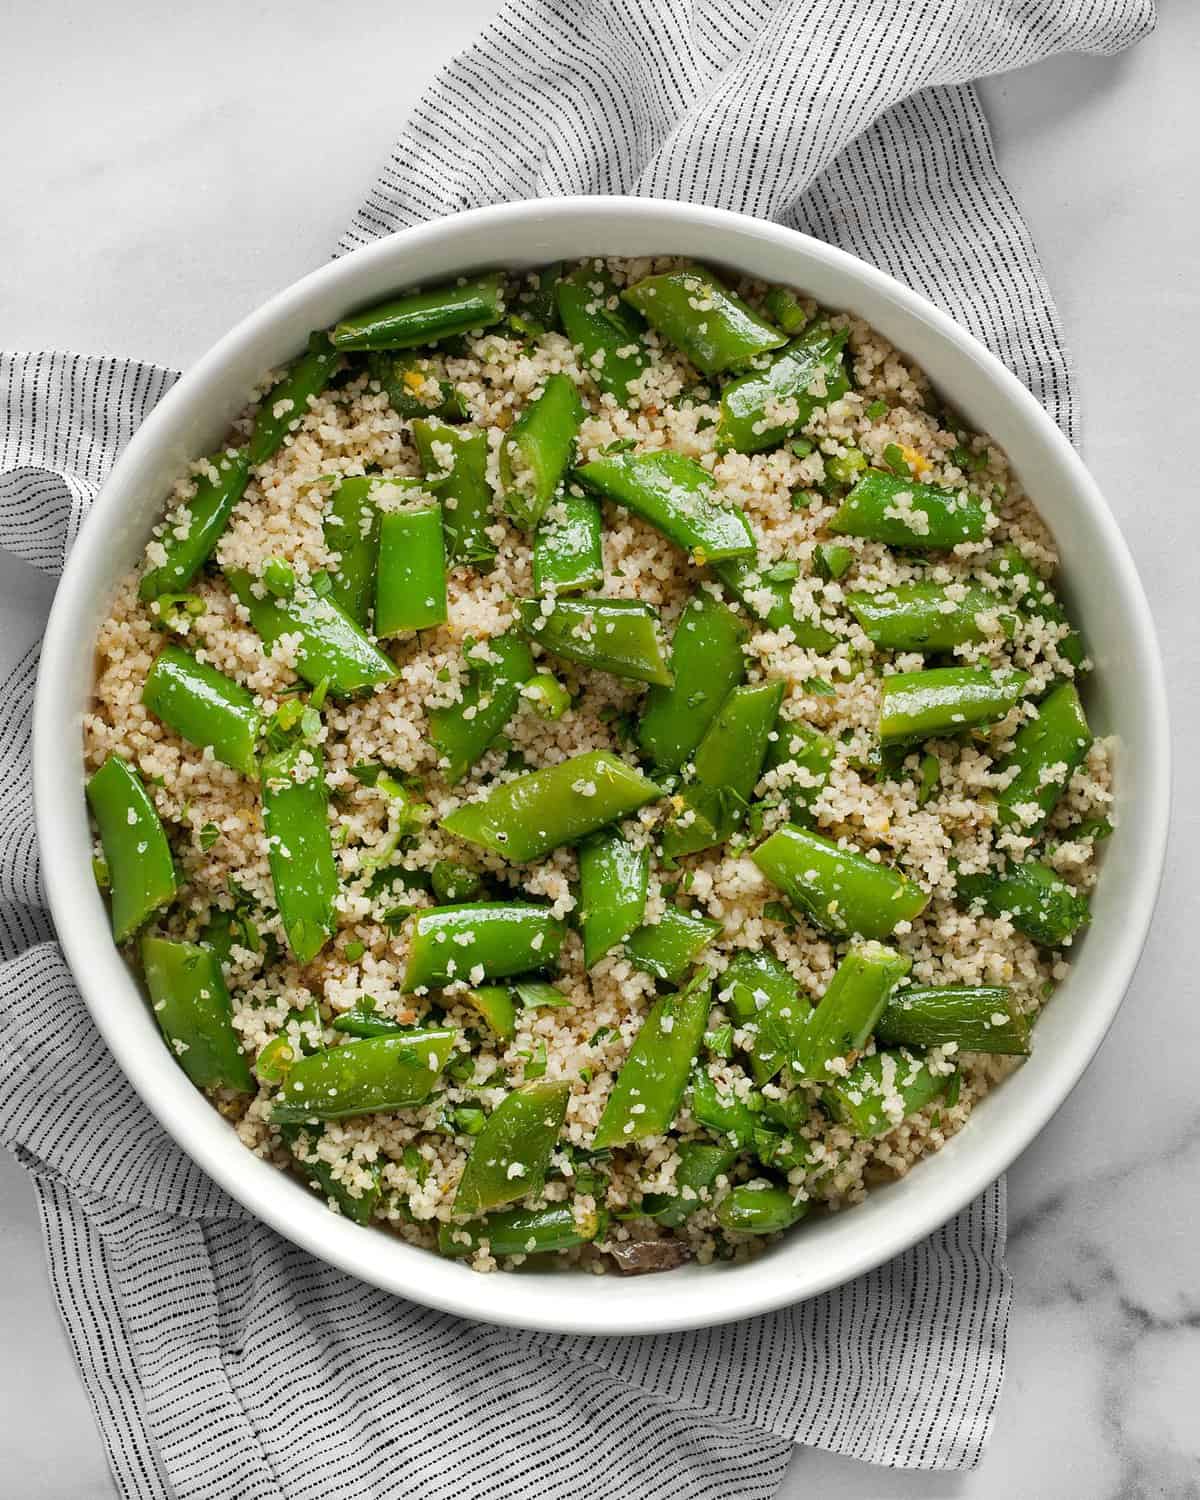 Couscous with snap peas in a bowl.